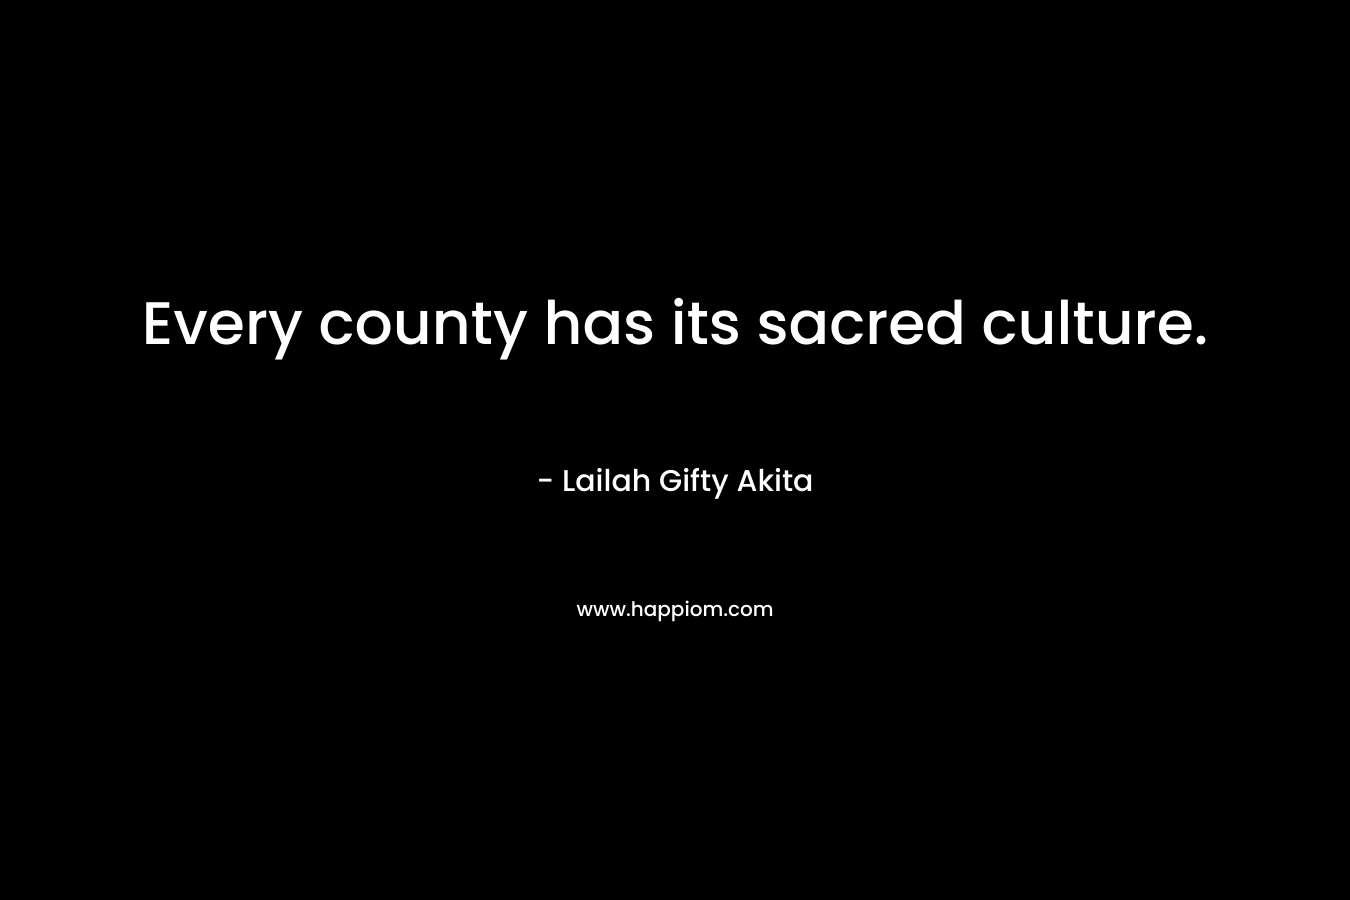 Every county has its sacred culture.